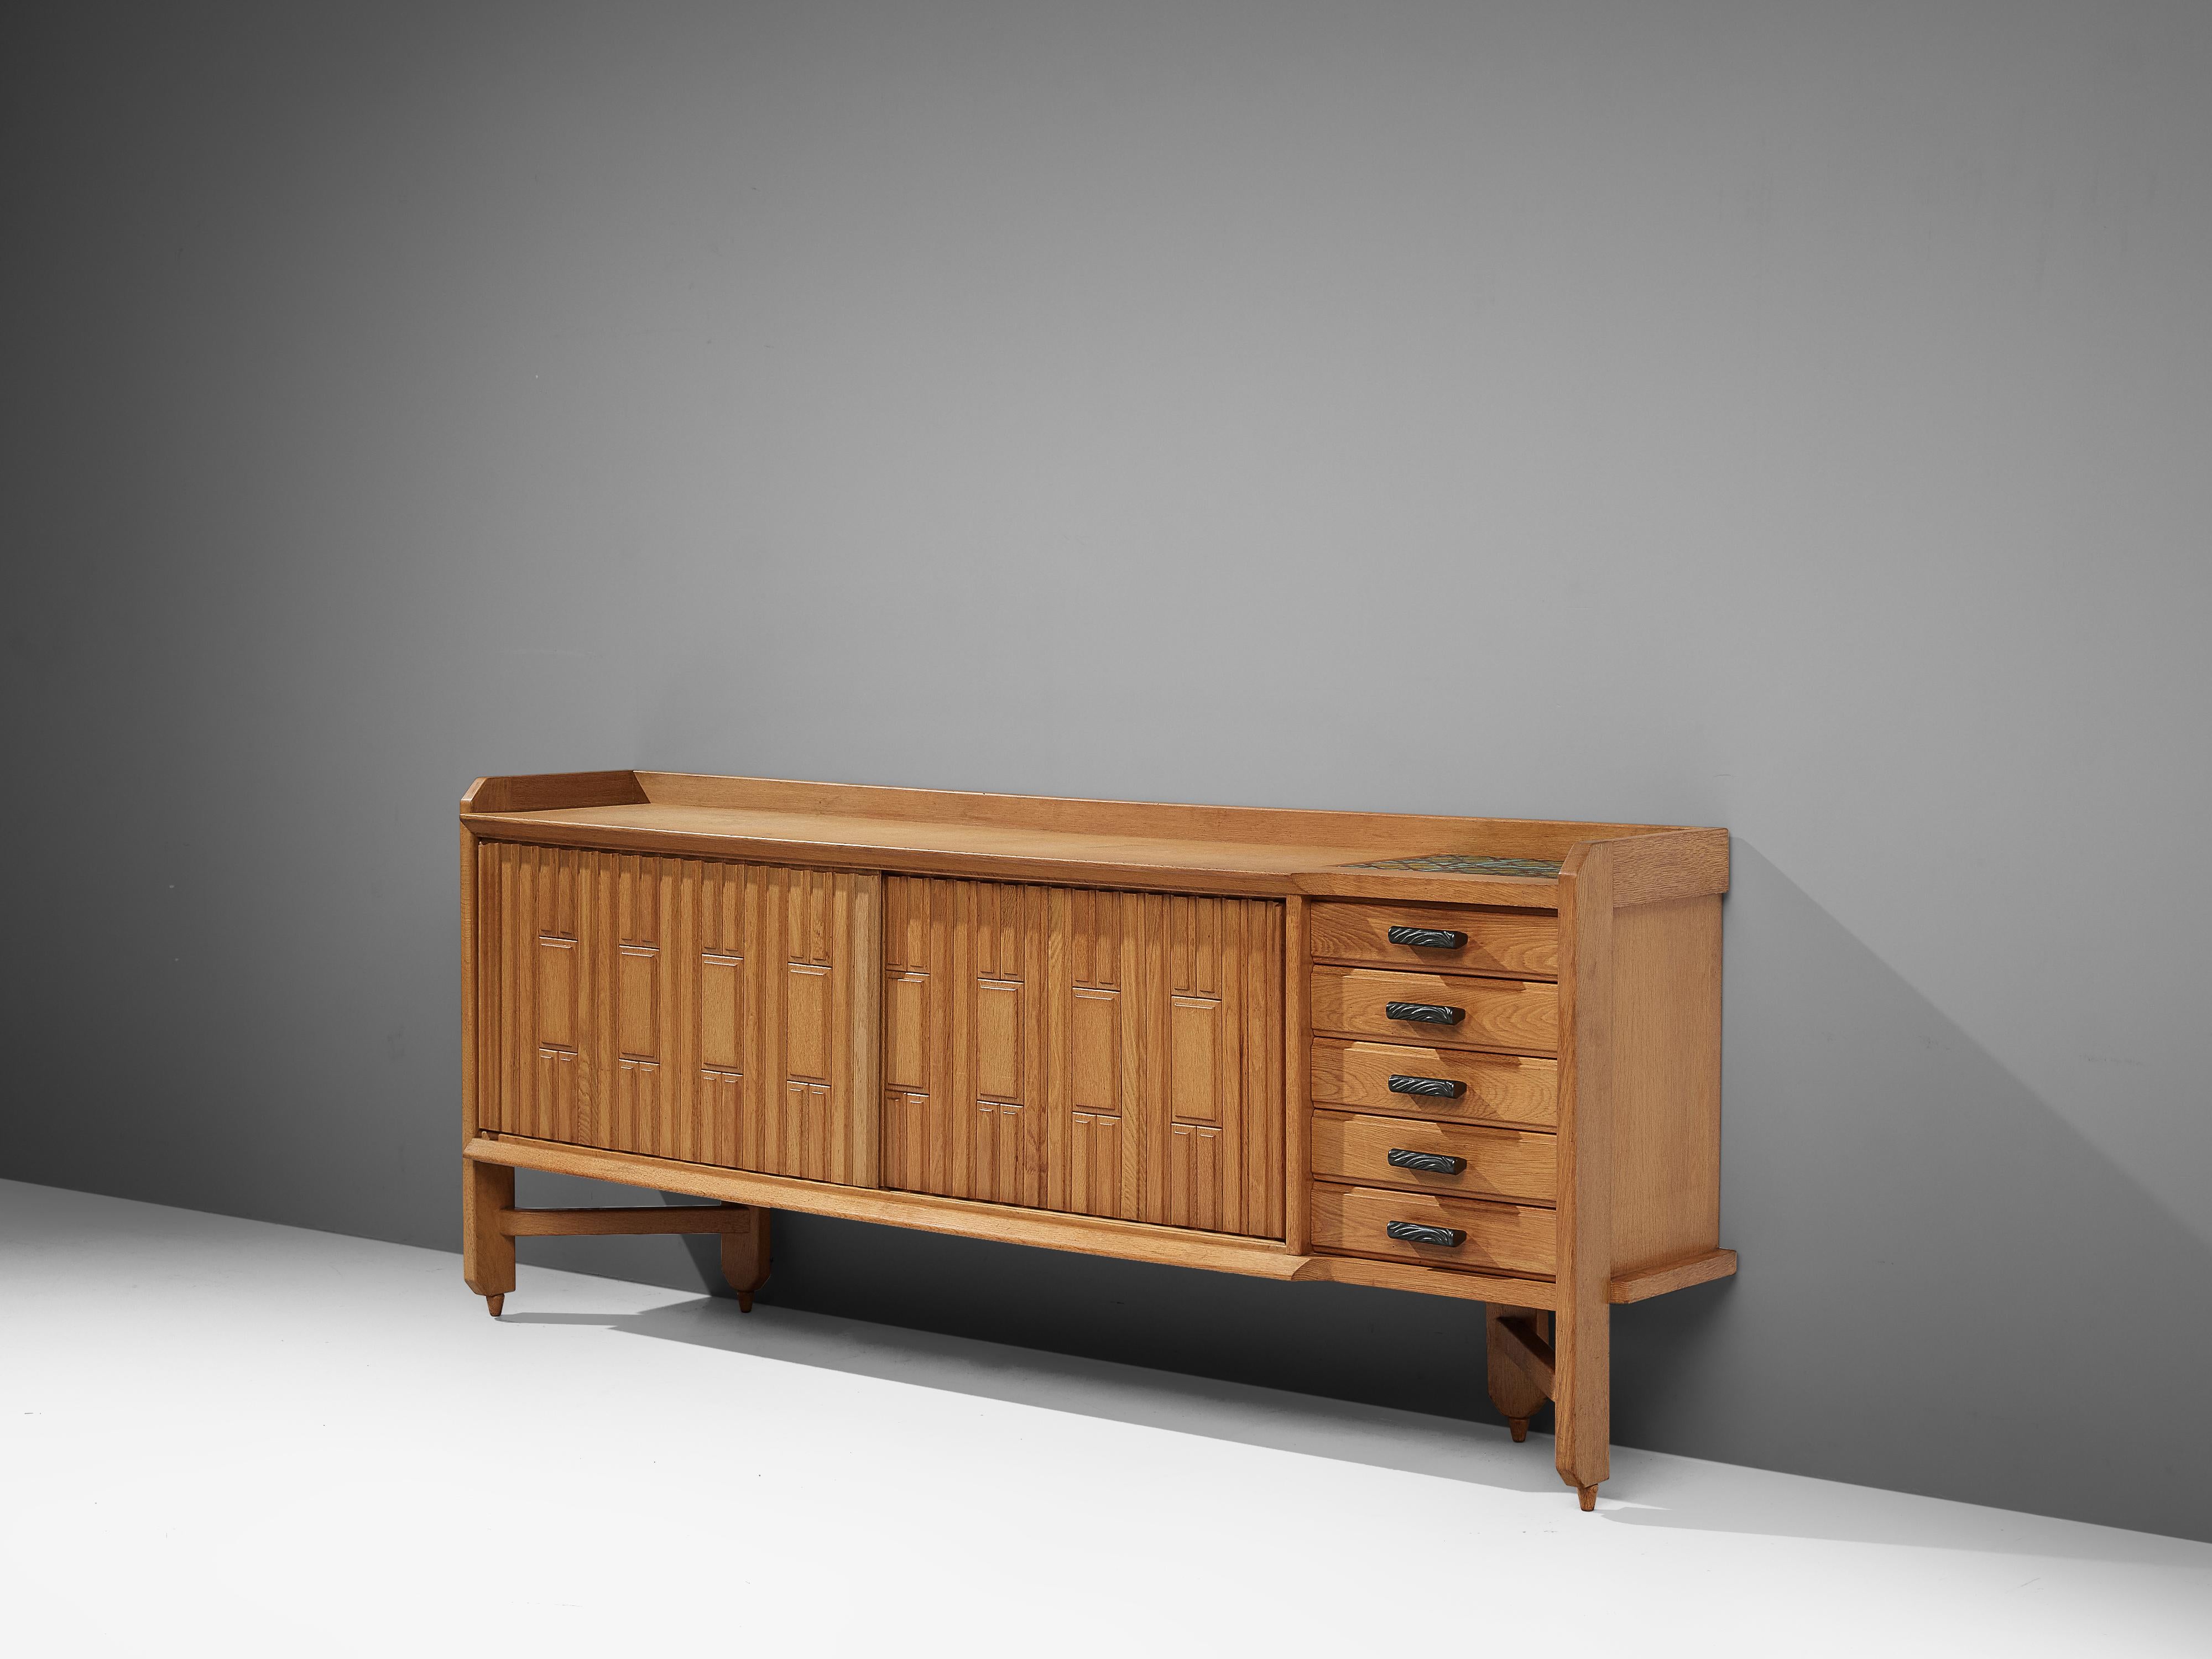 Guillerme et Chambron, sideboard, oak, ceramic, France, 1960s

Characteristic sideboard in solid oak with ceramic tiles. This cabinet holds the characteristics of the French designer duo Guillerme et Chambron. The base has typical legs and provides